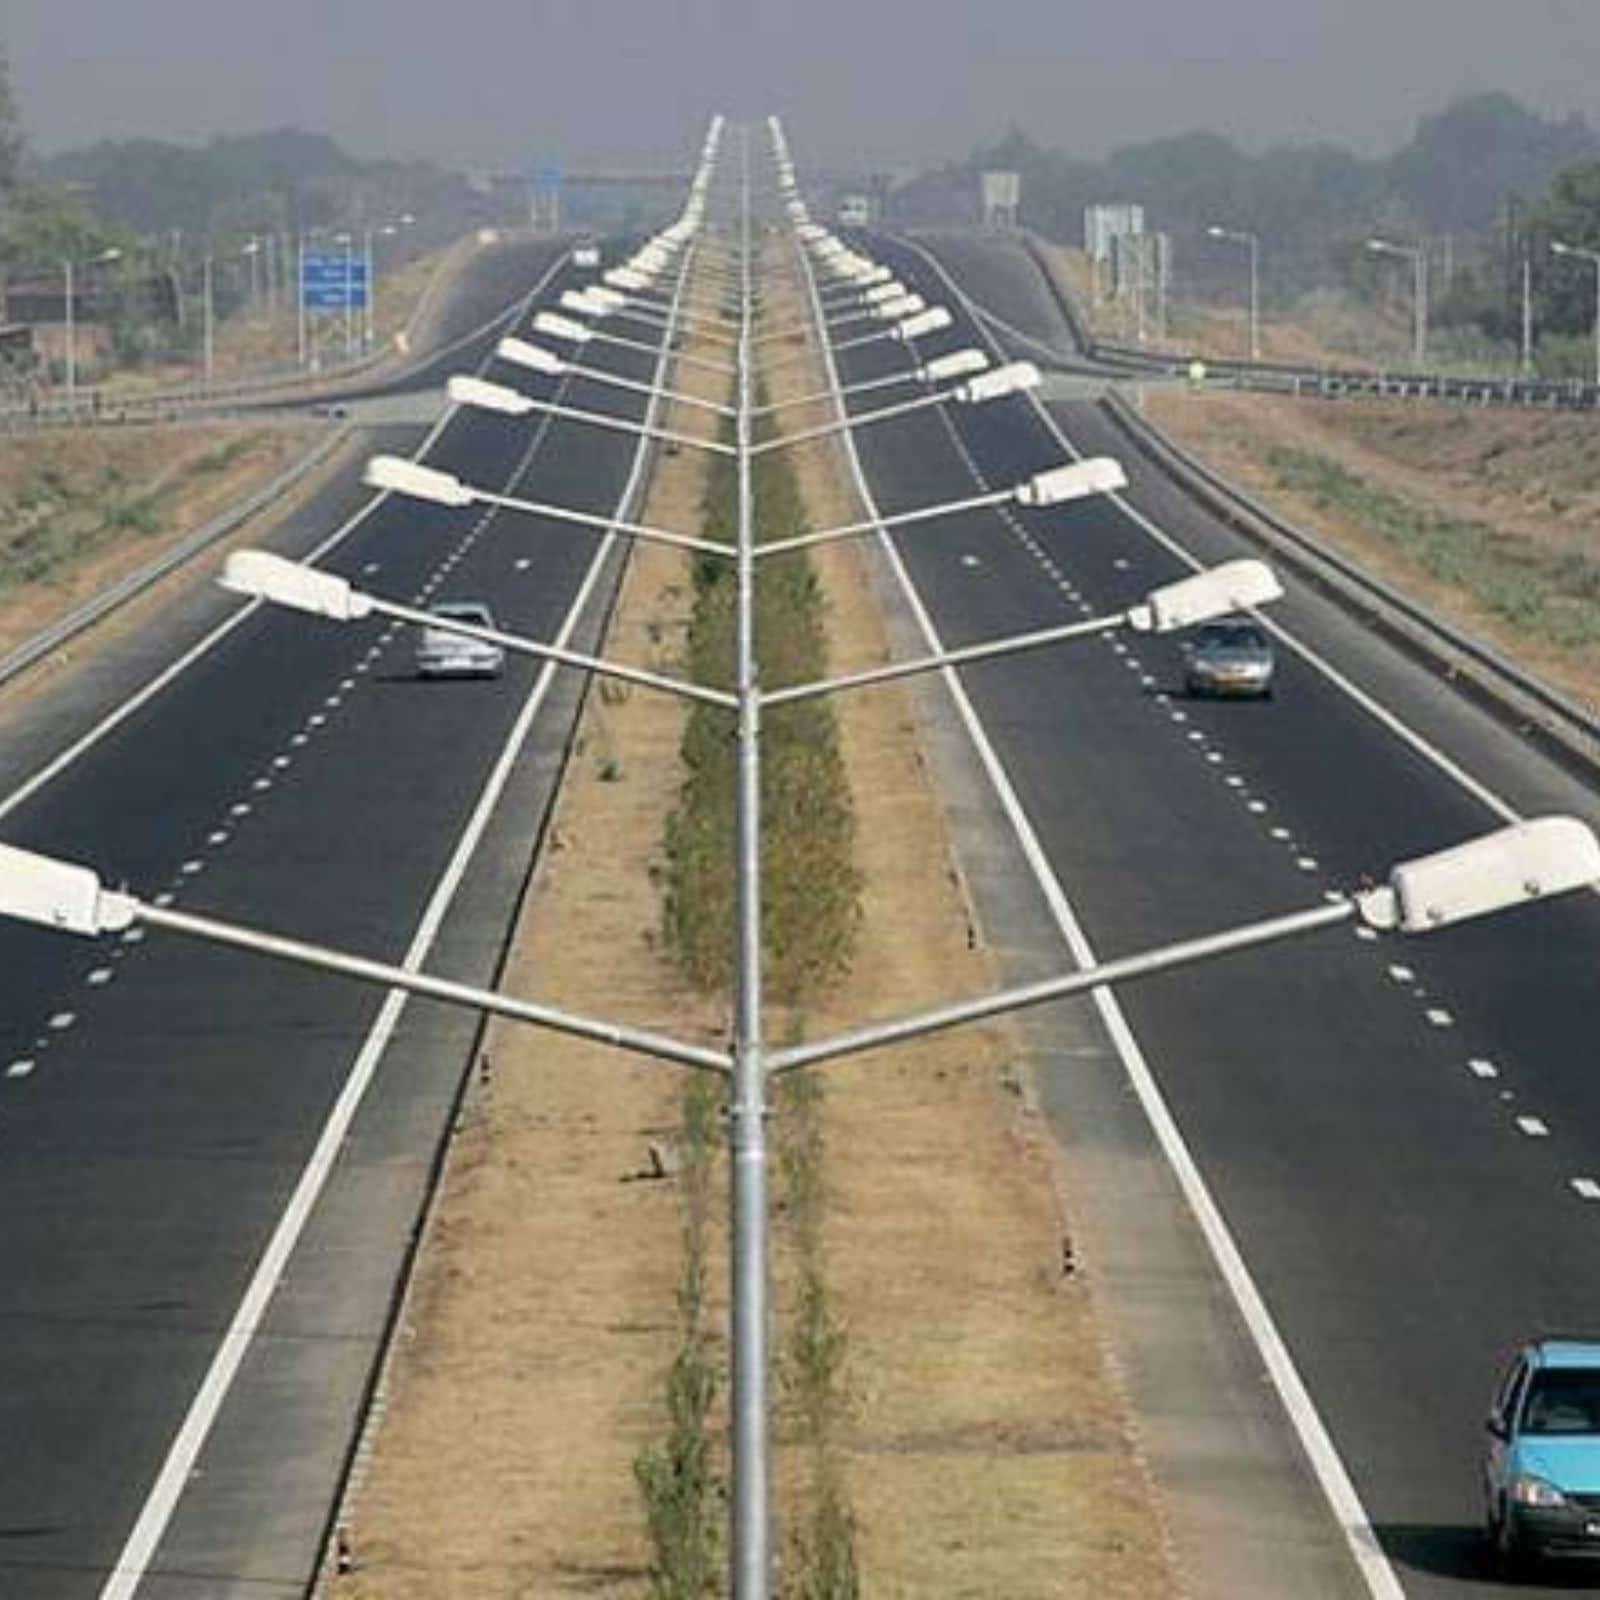 J P ENTERPRISES declare L-1 for Road Project, value Rs: 193604948.7 in MAHARASTRA